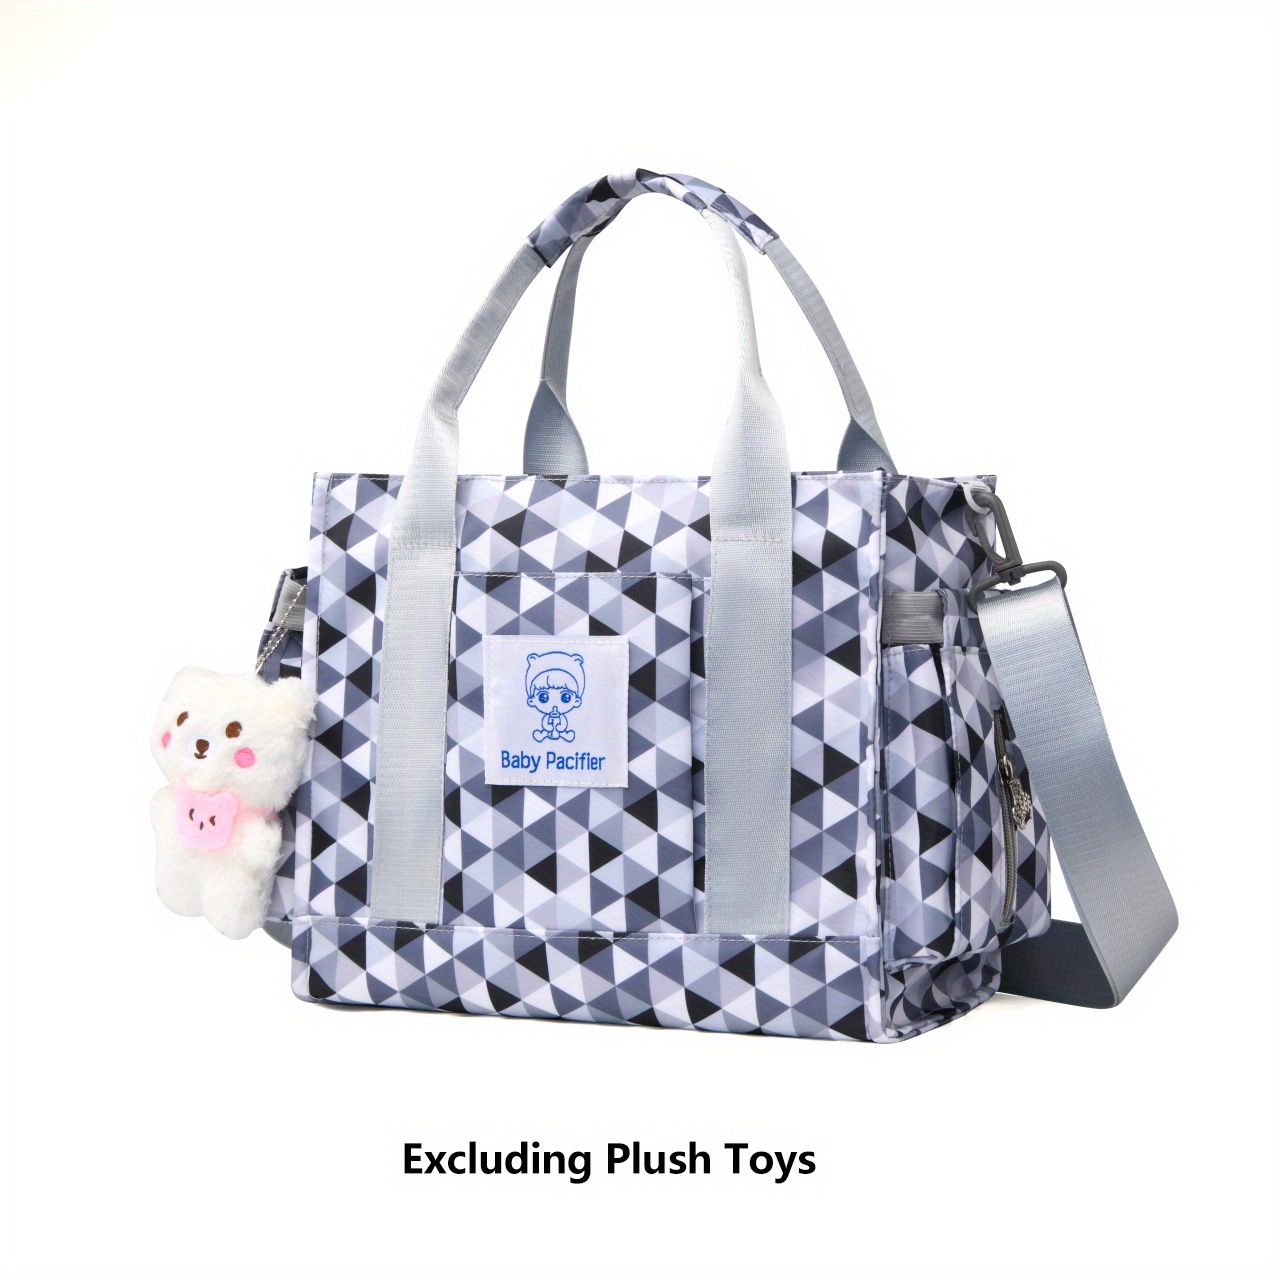 Gingham Large Capacity Pu Women's Single Shoulder Tote Bag For Holiday,  Travel, Hospital, Leisure, College